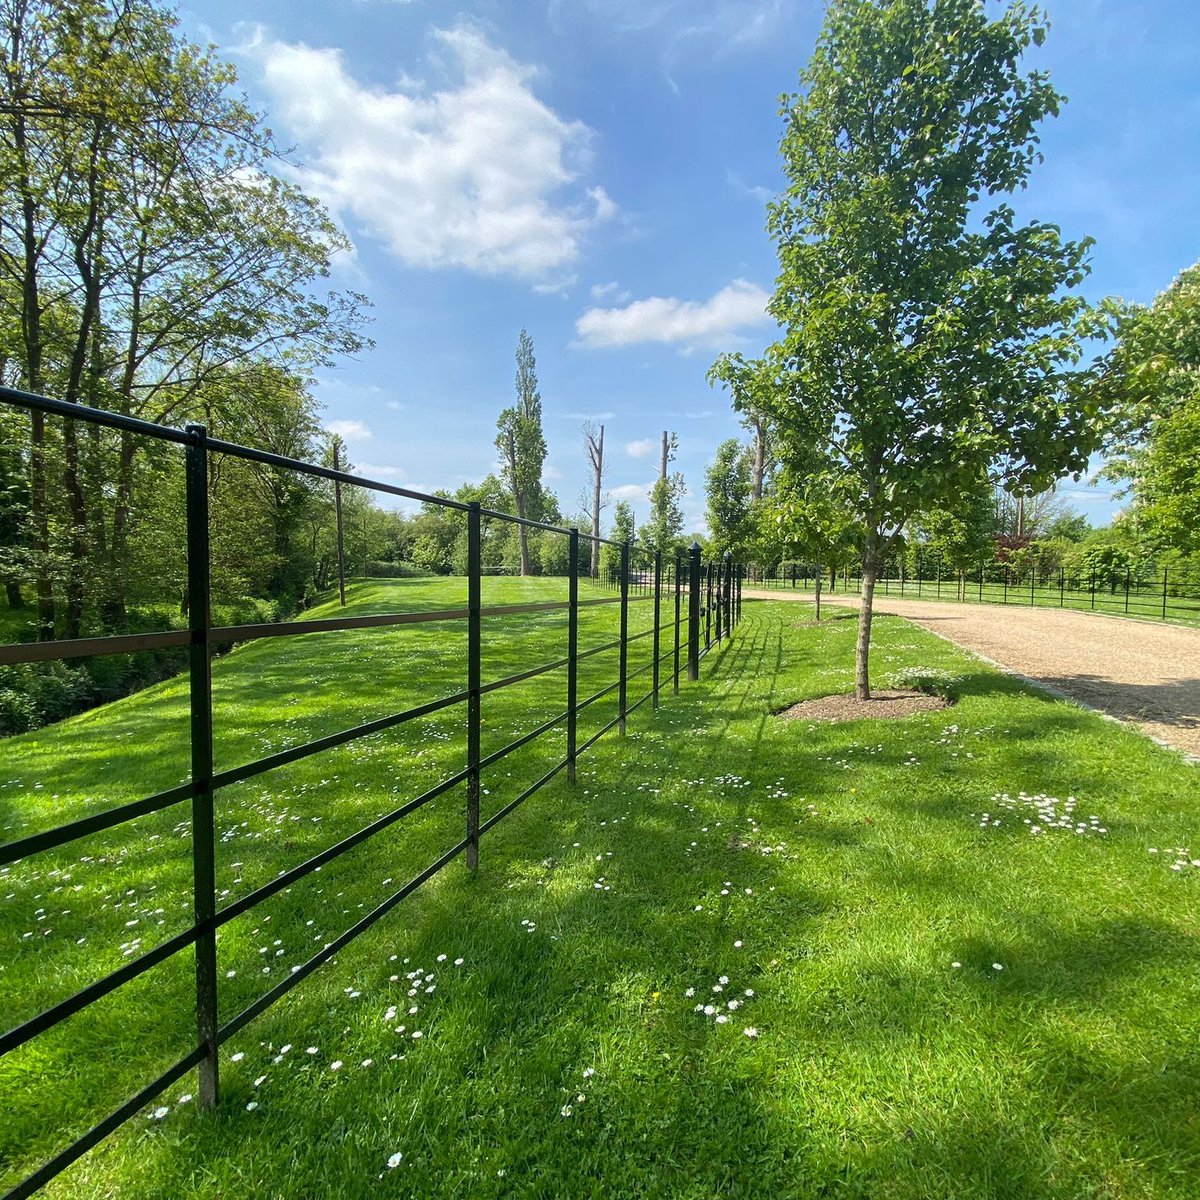 So great to be back in East Sussex and see how our previous installation is looking. Estate fencing creating the perfect border to this driveway. 

#fence
#steelfence
#driveway
#metalfence
#installation
#thetraditionalco